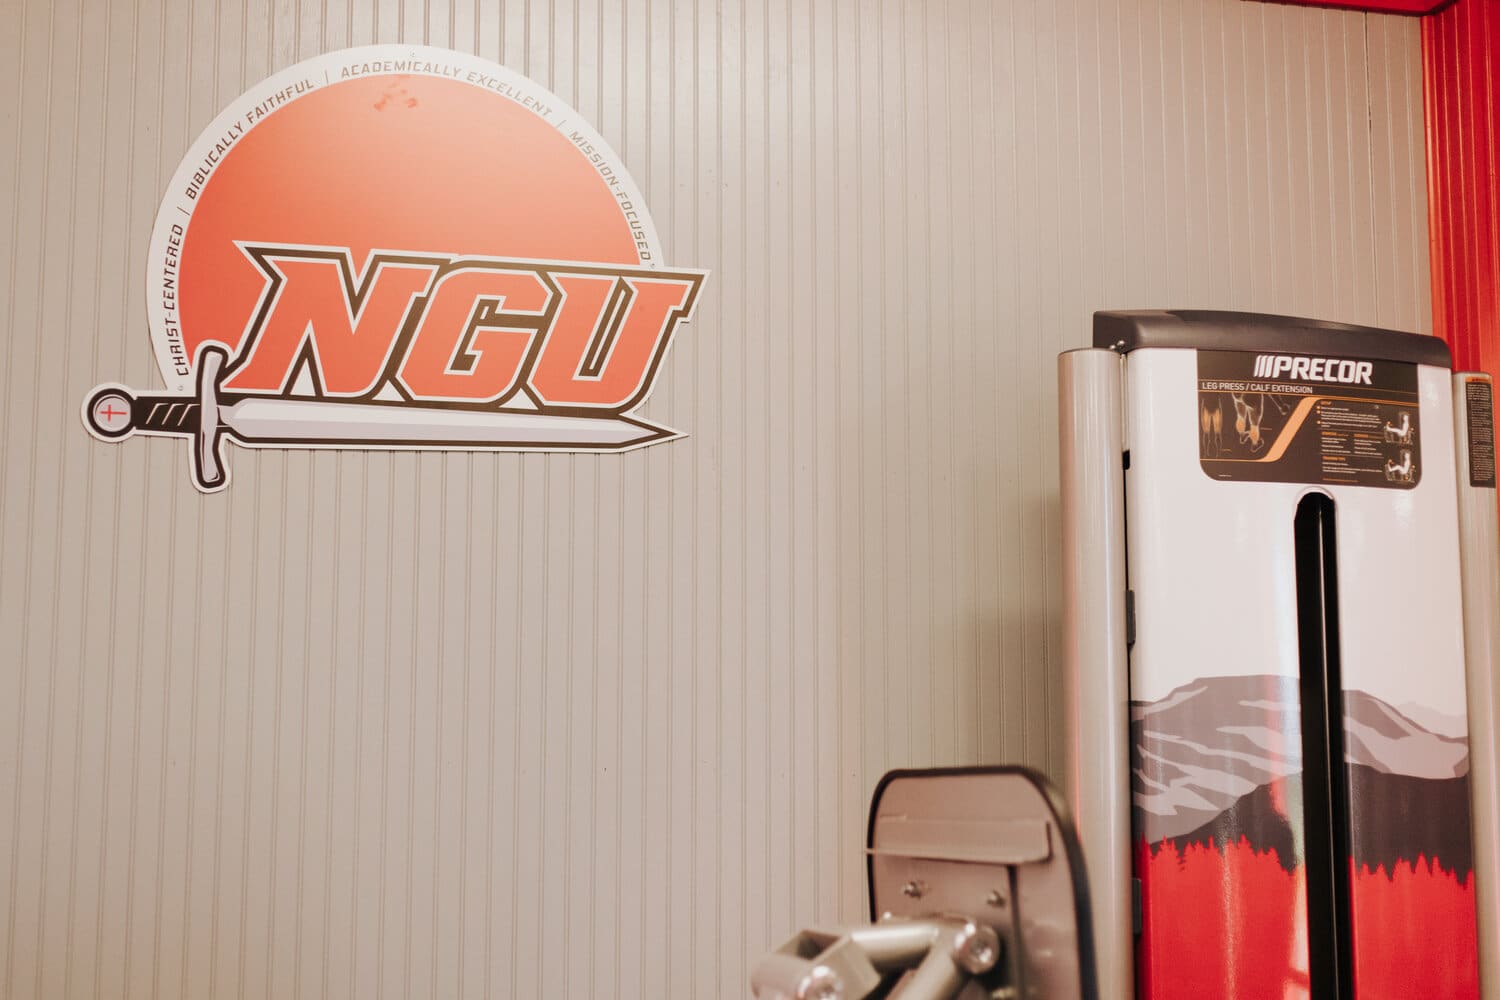 Not only did Younts receive new free weights, but it also received new machines and signs.